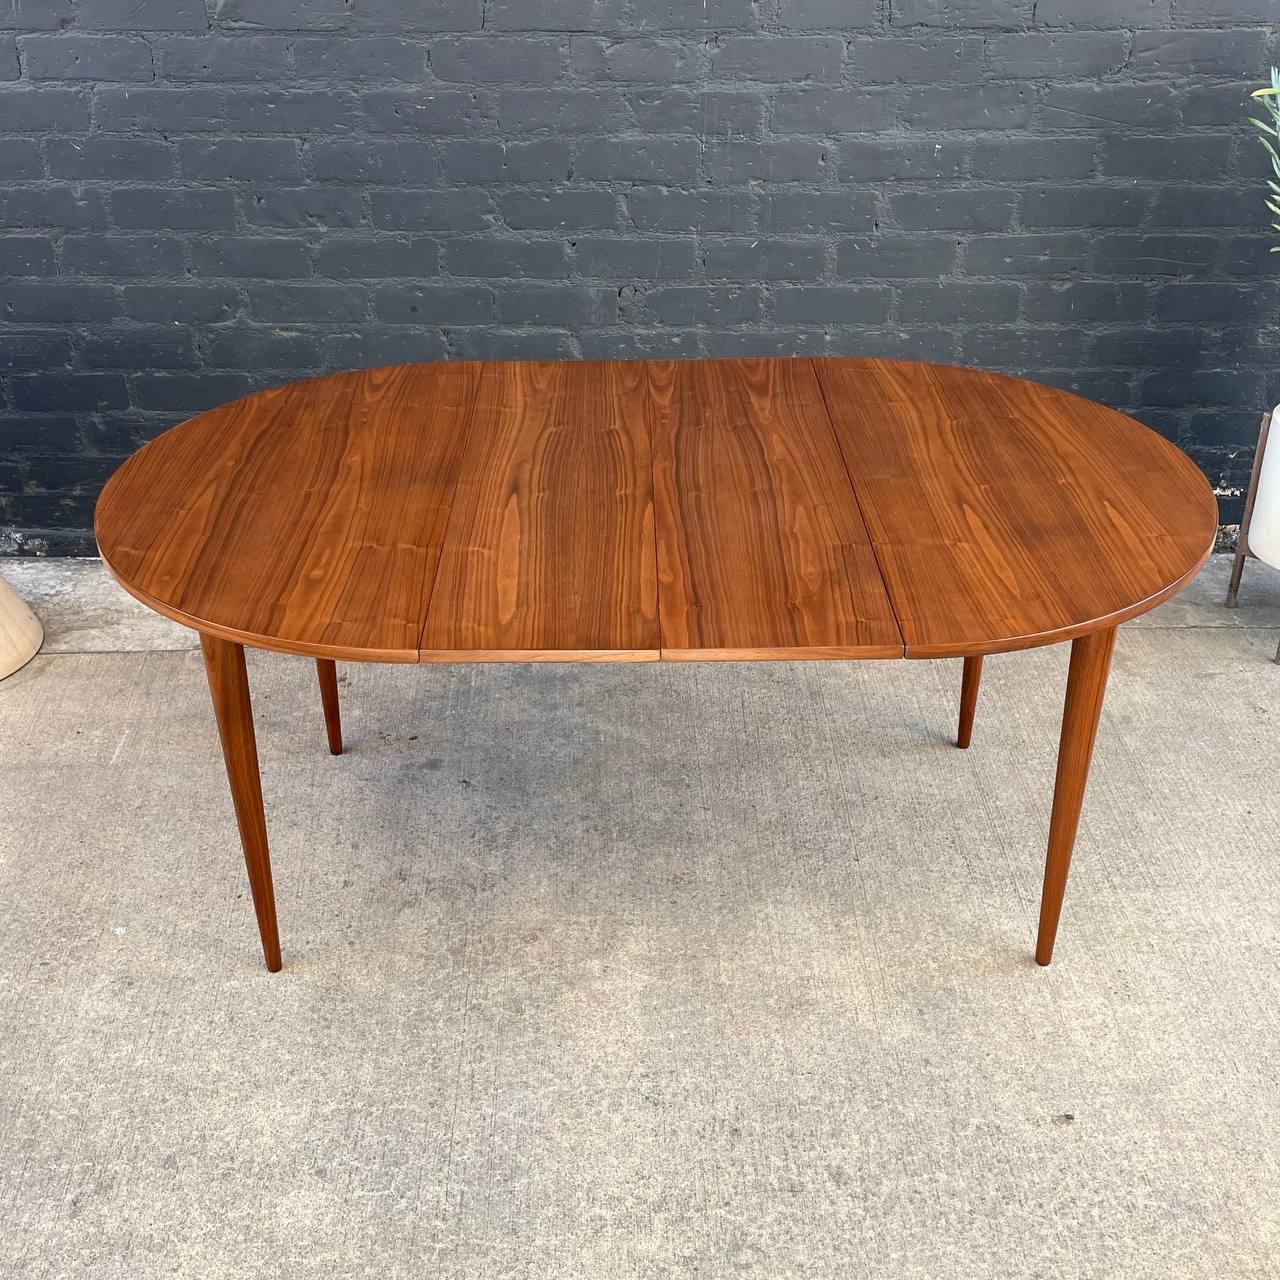 American Newly Refinished - Expanding Mid-Century Modern Round Walnut Dining Table